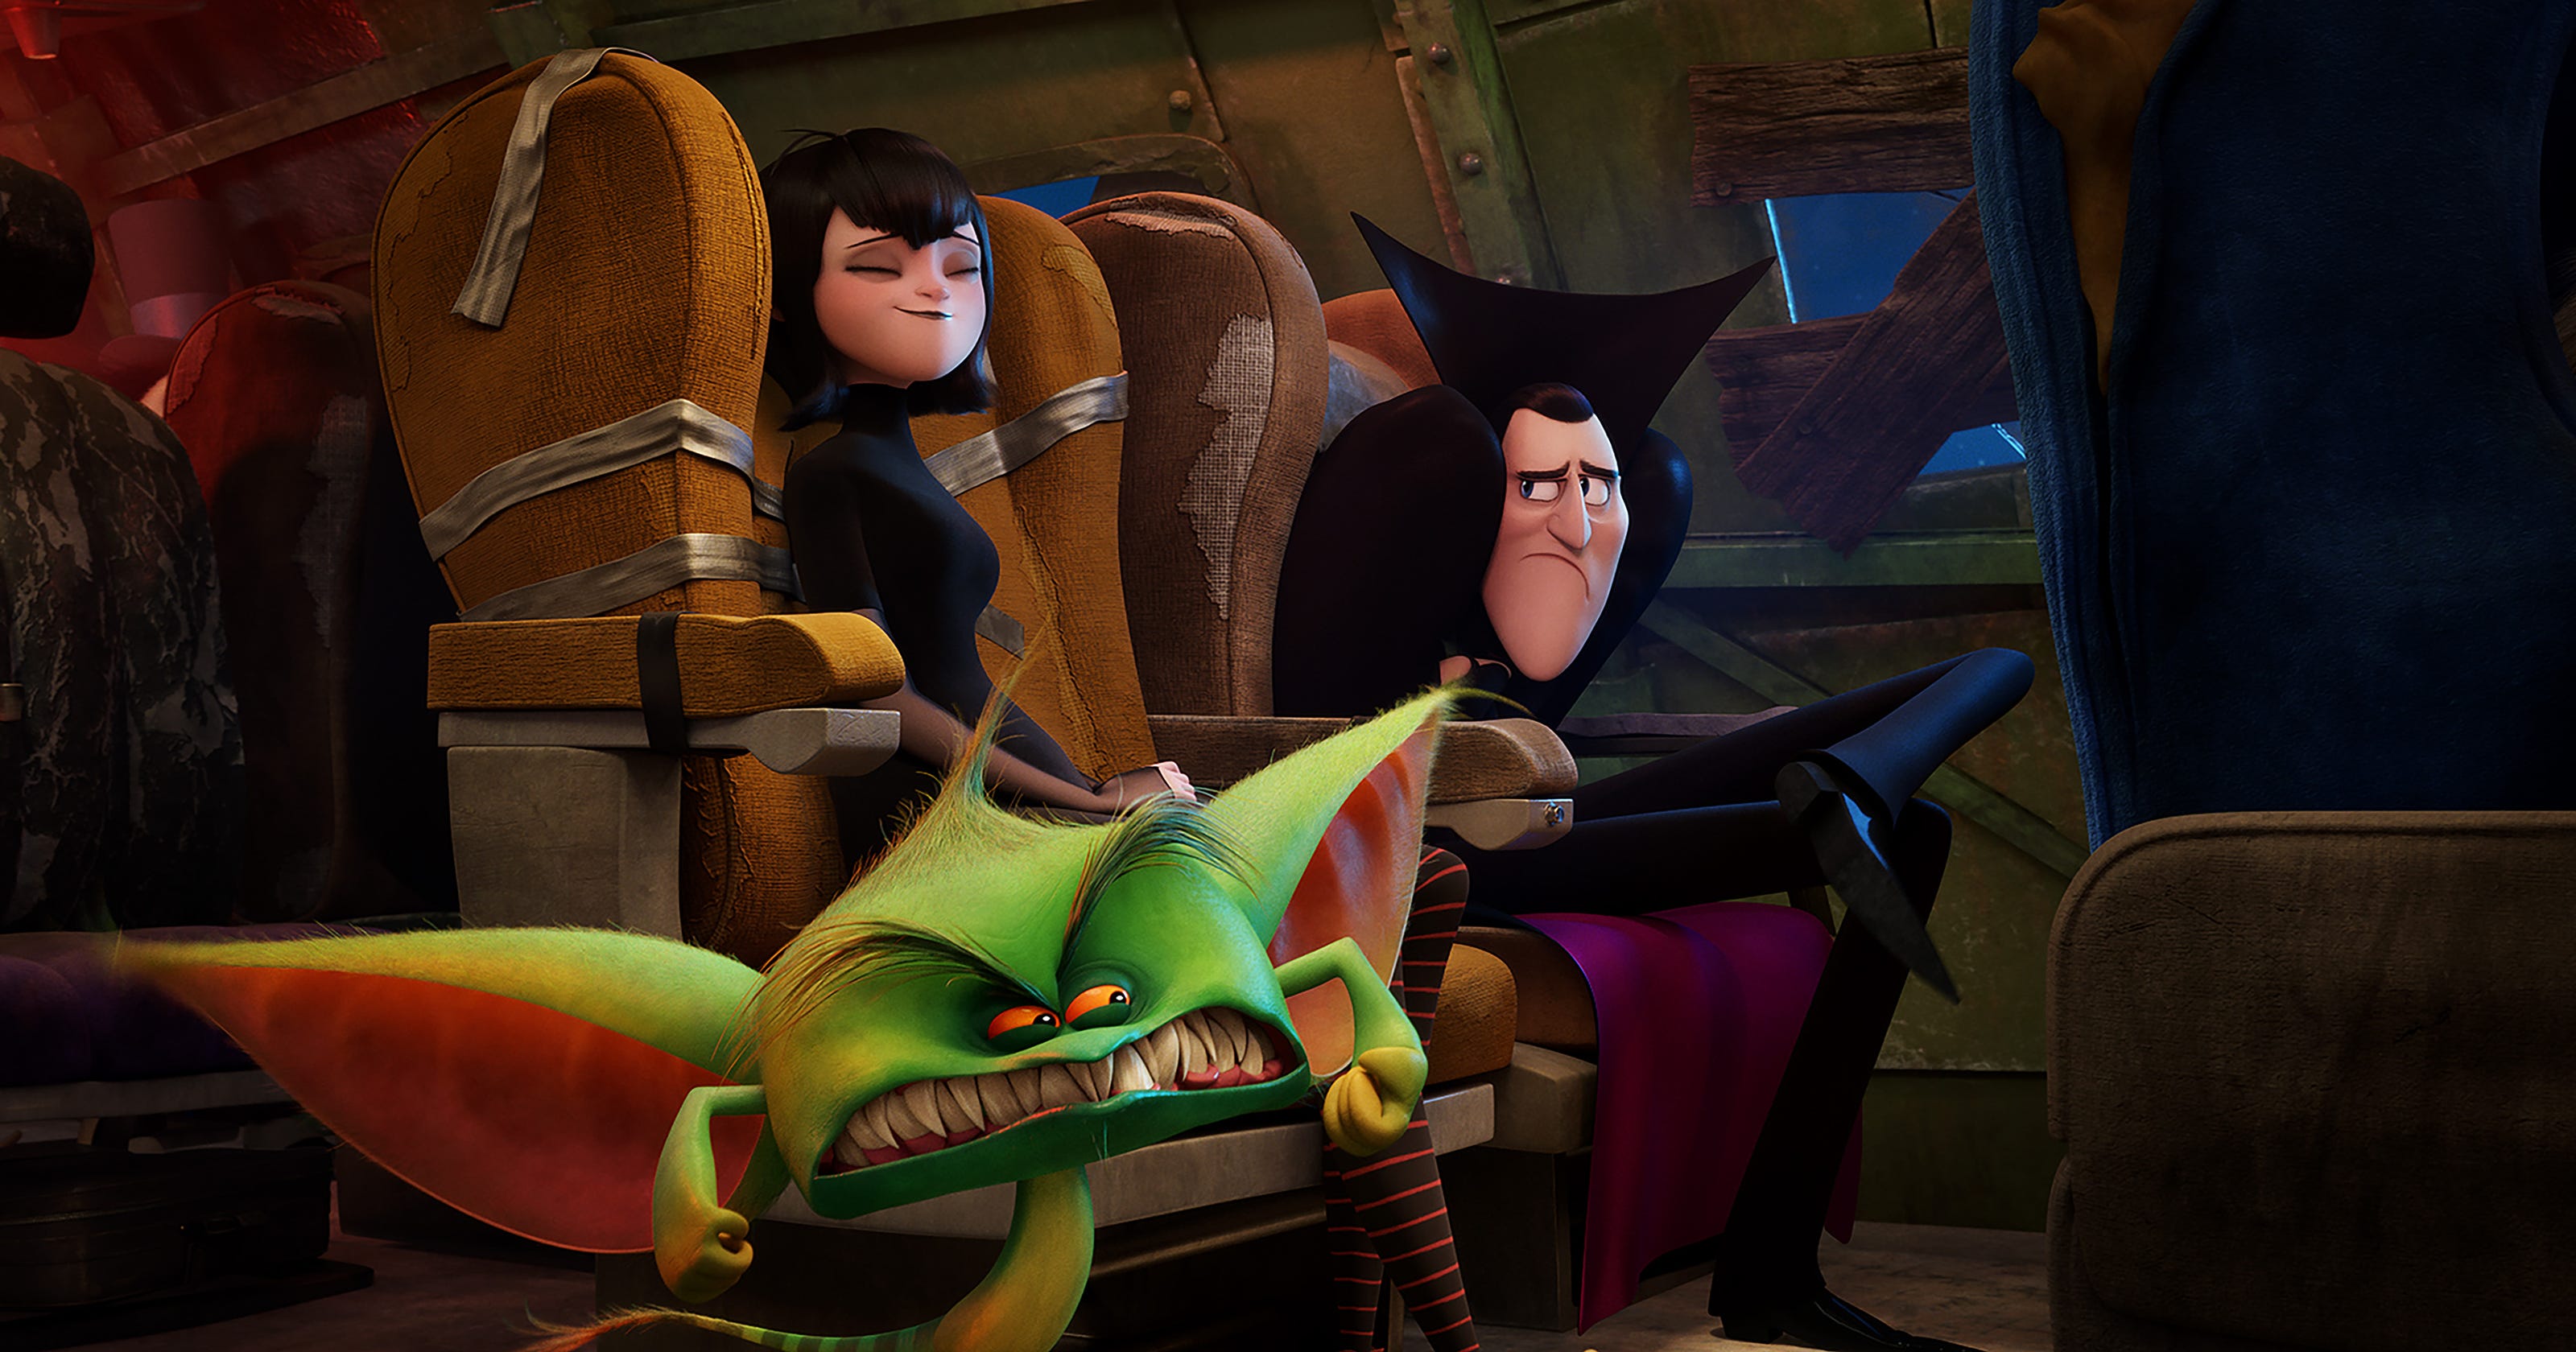 Hotel Transylvania 3 Vampire Love Abounds In Silly Touching Tale 